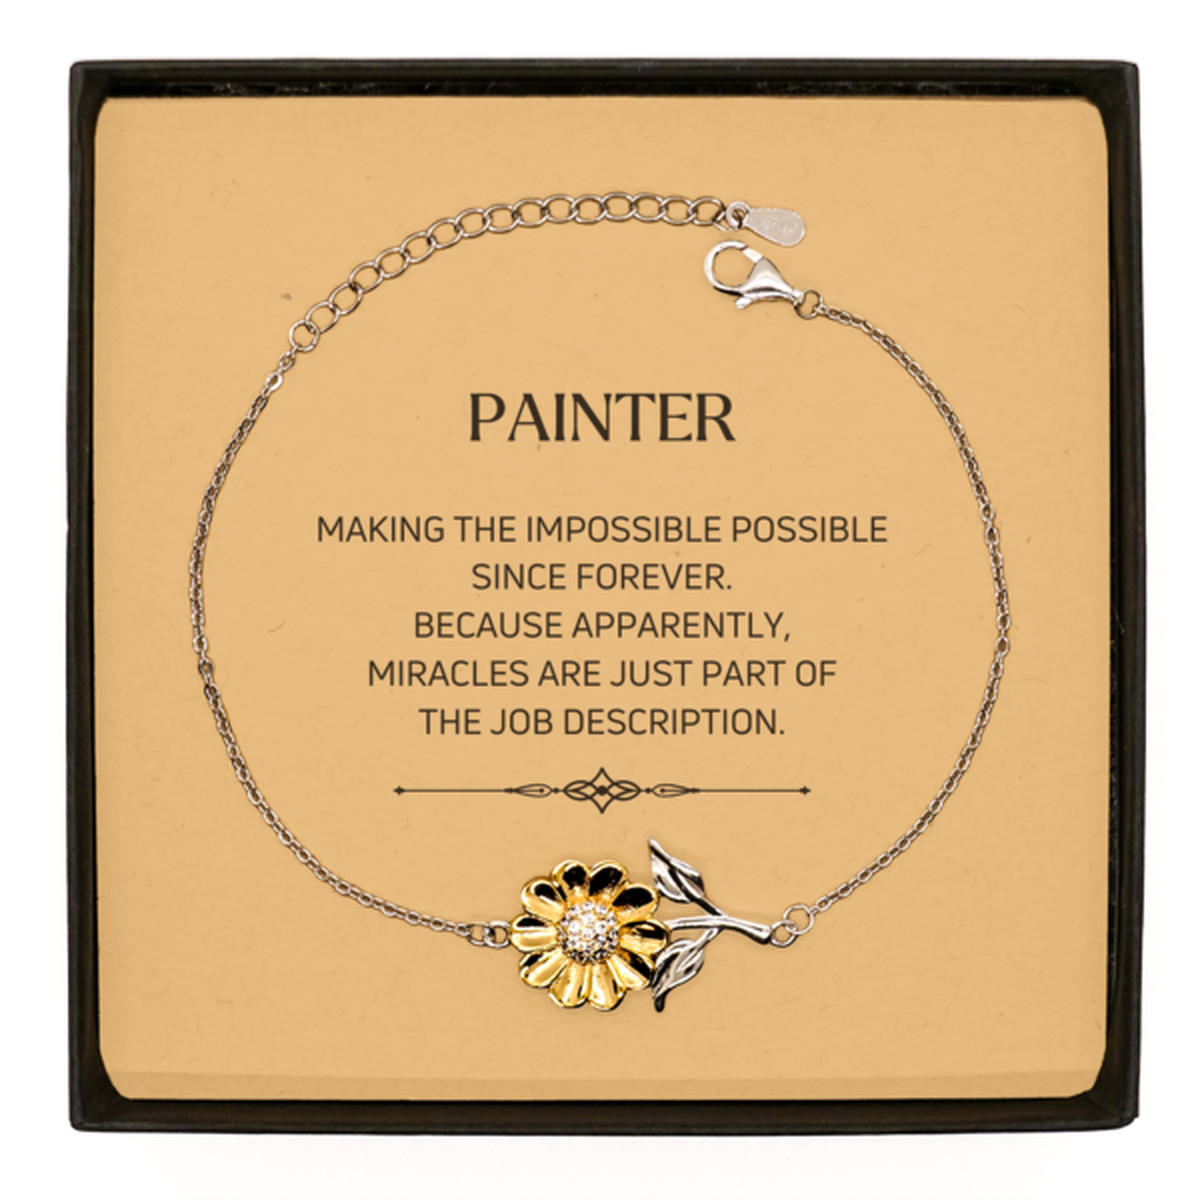 Funny Painter Gifts, Miracles are just part of the job description, Inspirational Birthday Sunflower Bracelet For Painter, Men, Women, Coworkers, Friends, Boss